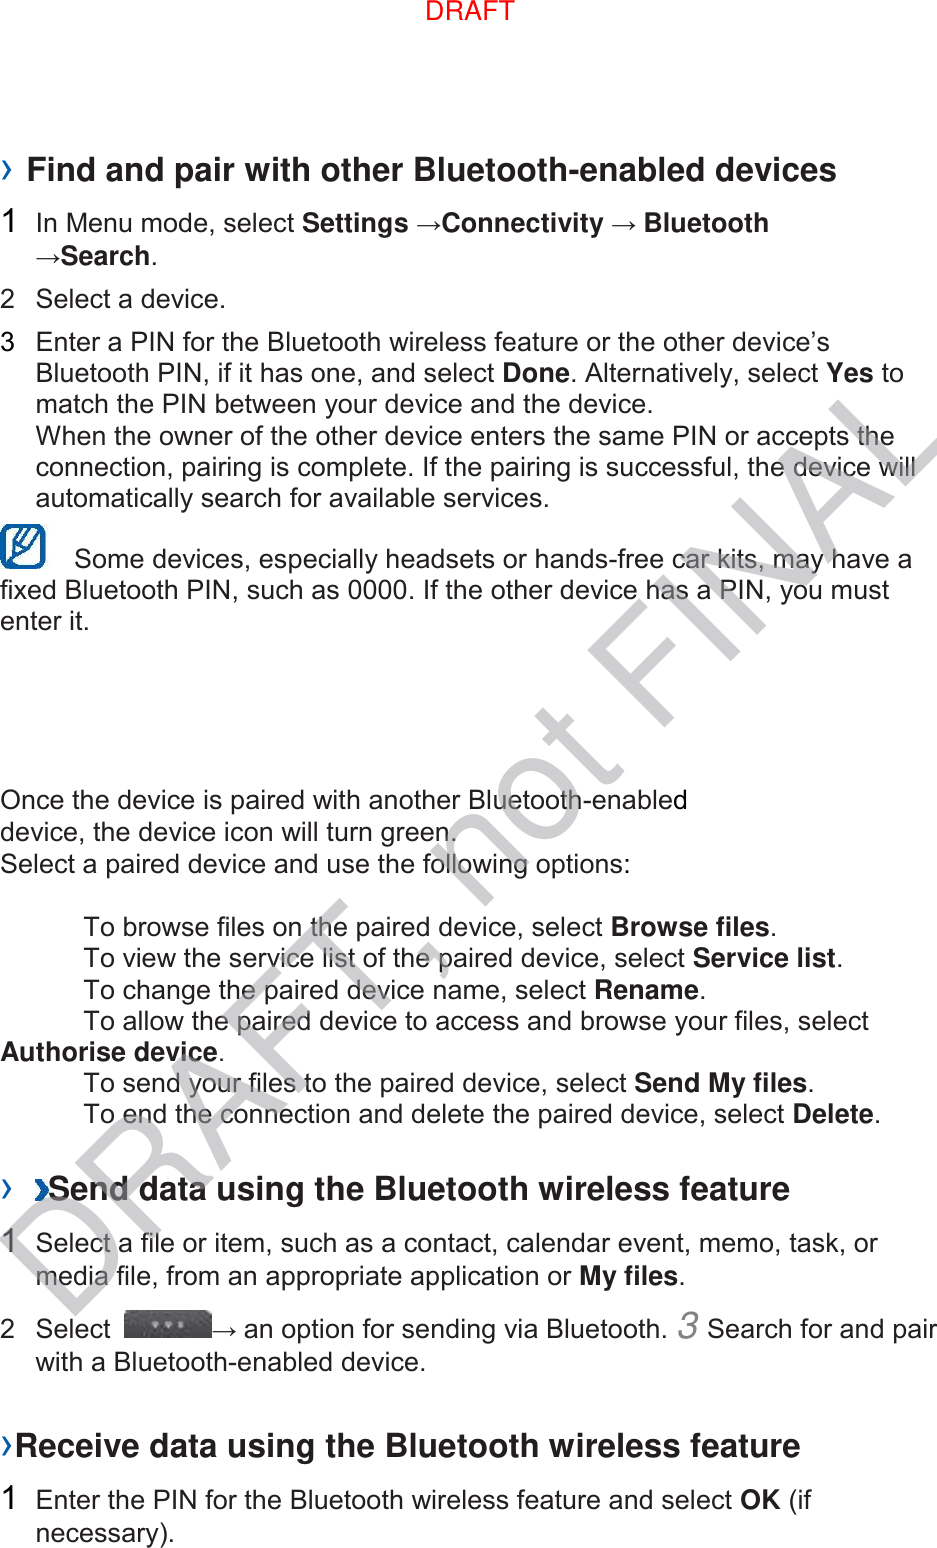 › Find and pair with other Bluetooth-enabled devices   1  In Menu mode, select Settings →Connectivity → Bluetooth →Search.   2  Select a device.   3  Enter a PIN for the Bluetooth wireless feature or the other device’s Bluetooth PIN, if it has one, and select Done. Alternatively, select Yes to match the PIN between your device and the device.   When the owner of the other device enters the same PIN or accepts the connection, pairing is complete. If the pairing is successful, the device will automatically search for available services.     Some devices, especially headsets or hands-free car kits, may have a fixed Bluetooth PIN, such as 0000. If the other device has a PIN, you must enter it.   Once the device is paired with another Bluetooth-enabled device, the device icon will turn green. Select a paired device and use the following options:    To browse files on the paired device, select Browse files.     To view the service list of the paired device, select Service list.     To change the paired device name, select Rename.    To allow the paired device to access and browse your files, select Authorise device.     To send your files to the paired device, select Send My files.     To end the connection and delete the paired device, select Delete.    ›  Send data using the Bluetooth wireless feature   1  Select a file or item, such as a contact, calendar event, memo, task, or media file, from an appropriate application or My files.   2  Select  → an option for sending via Bluetooth. 3 Search for and pair with a Bluetooth-enabled device.   ›Receive data using the Bluetooth wireless feature   1  Enter the PIN for the Bluetooth wireless feature and select OK (if necessary).   DRAFTDRAFT, not FINAL